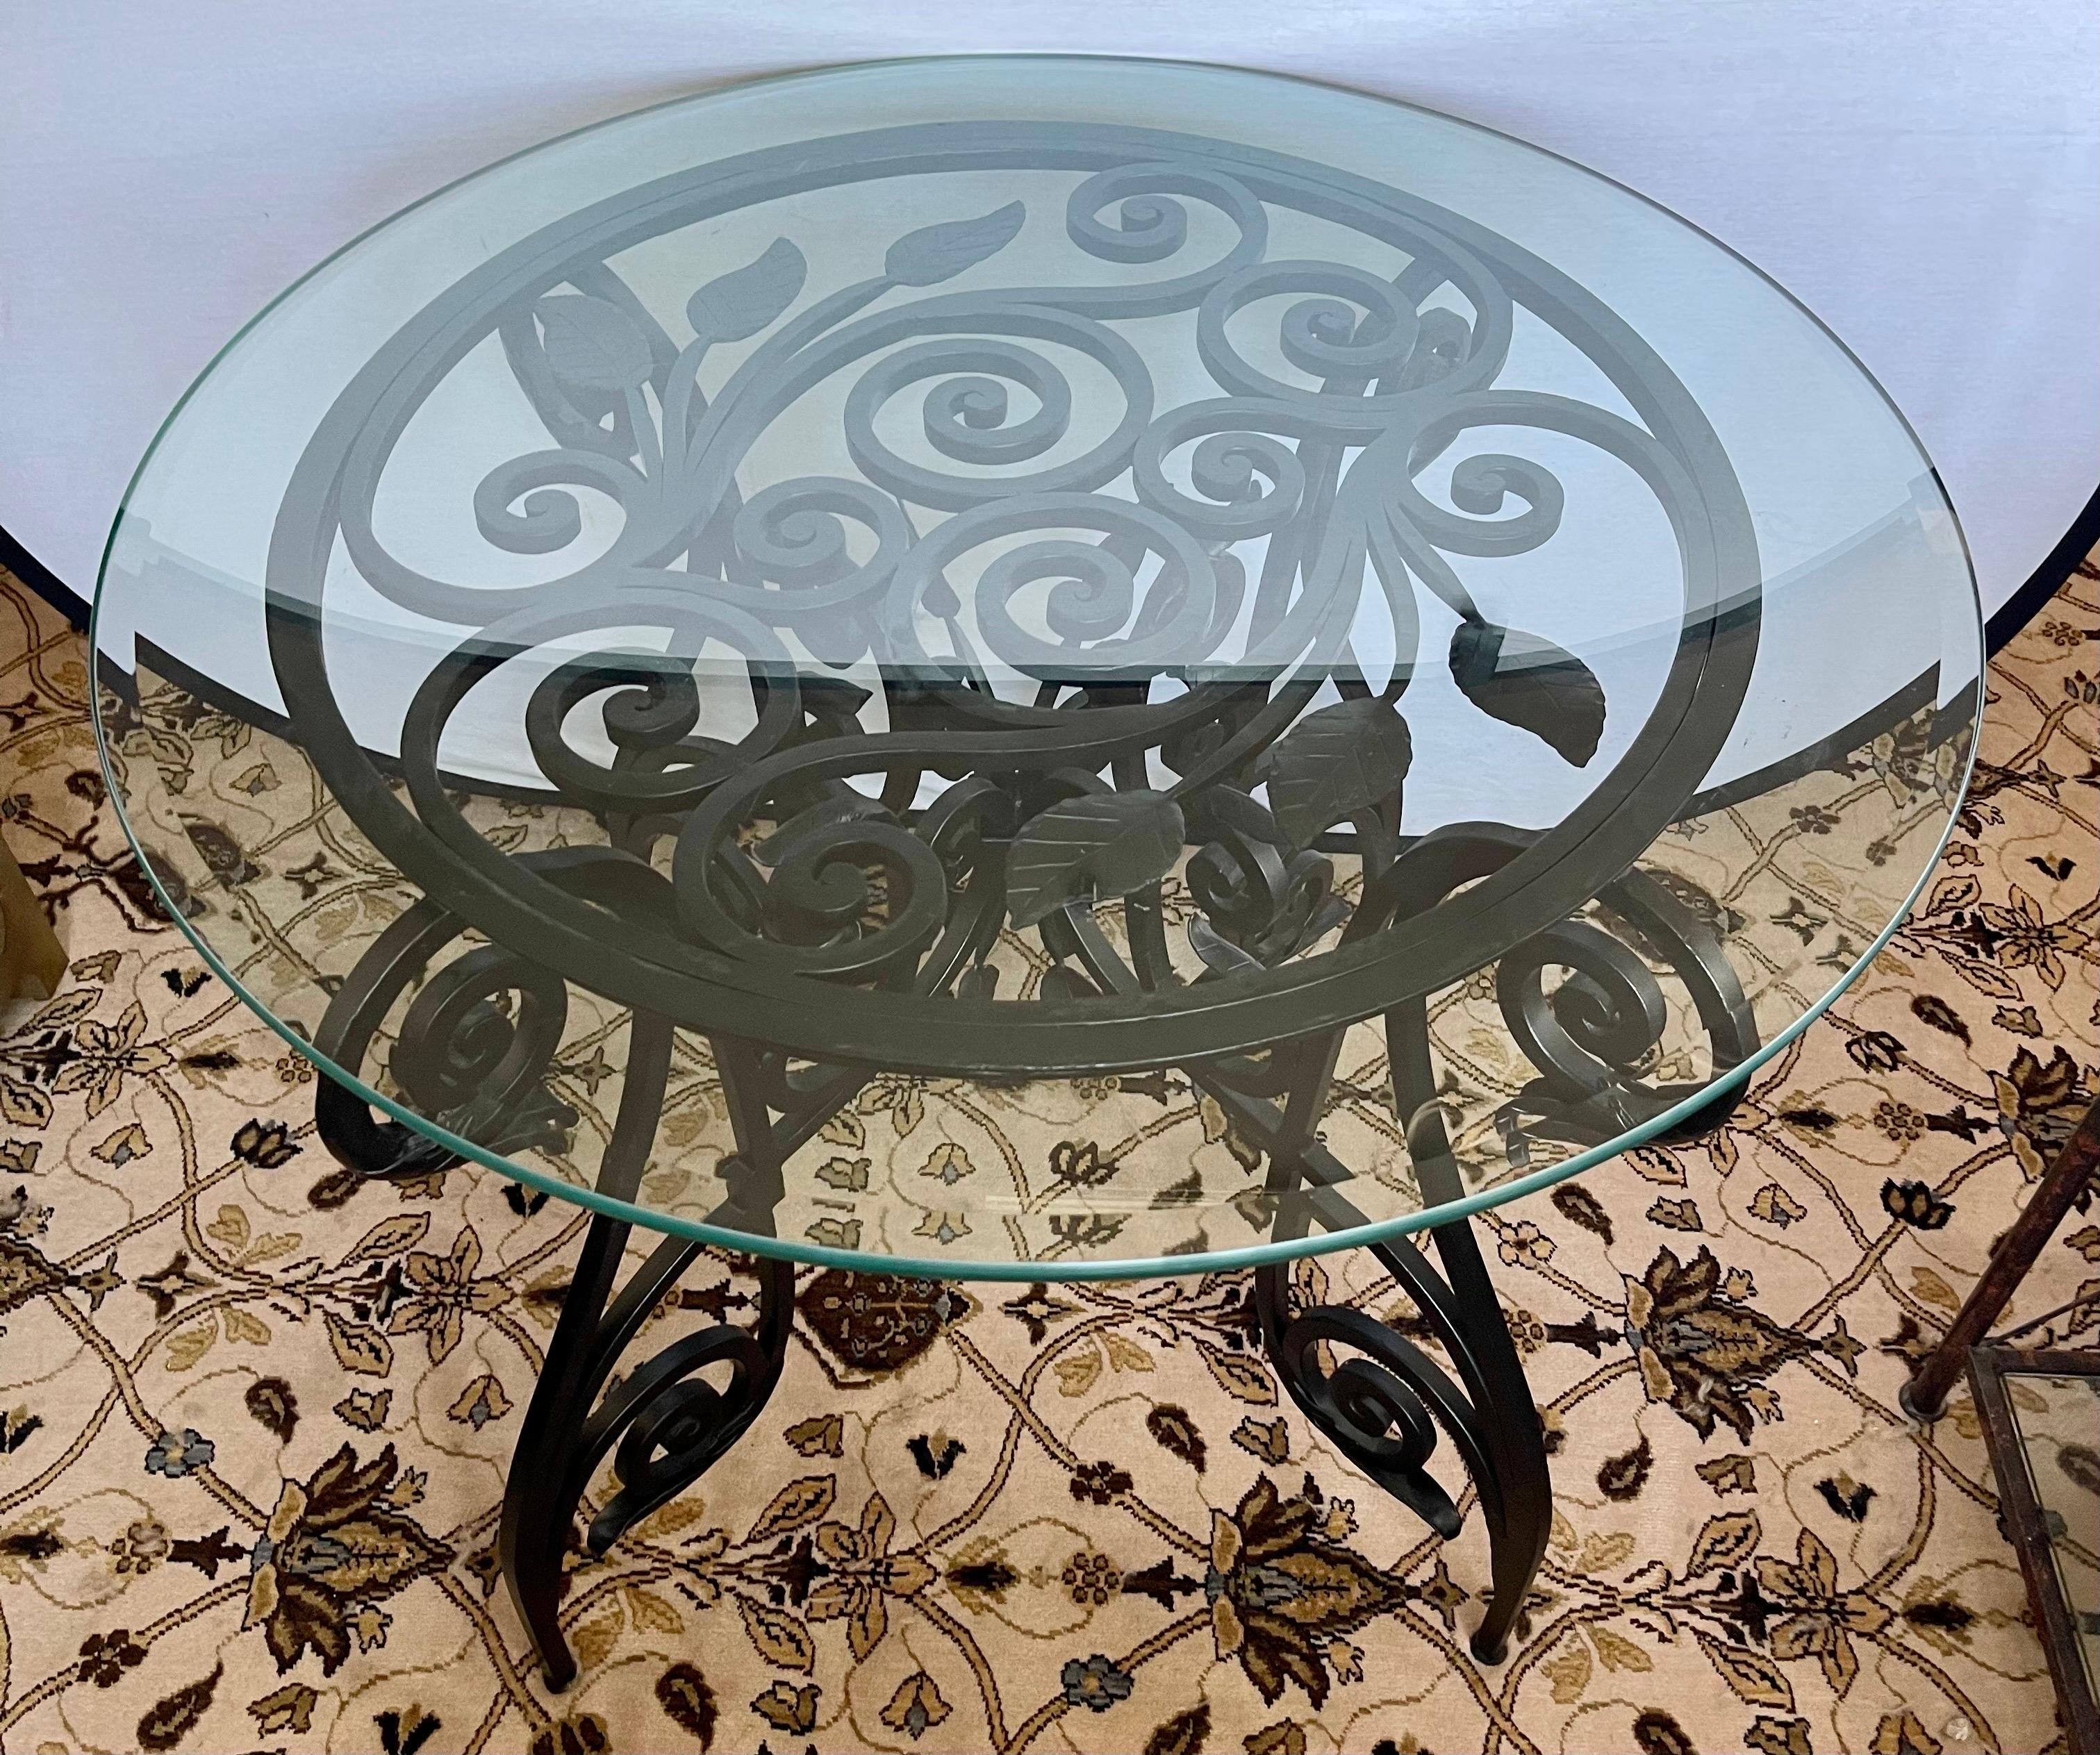 Stunning custom Maison Jansen style iron and glass center or foyer table with out of this world detail to iron sculptured base. The base alone weighs 120lbs and the glass top, which is .5 inches thick, weighs an additional 50lbs. A one of a kind